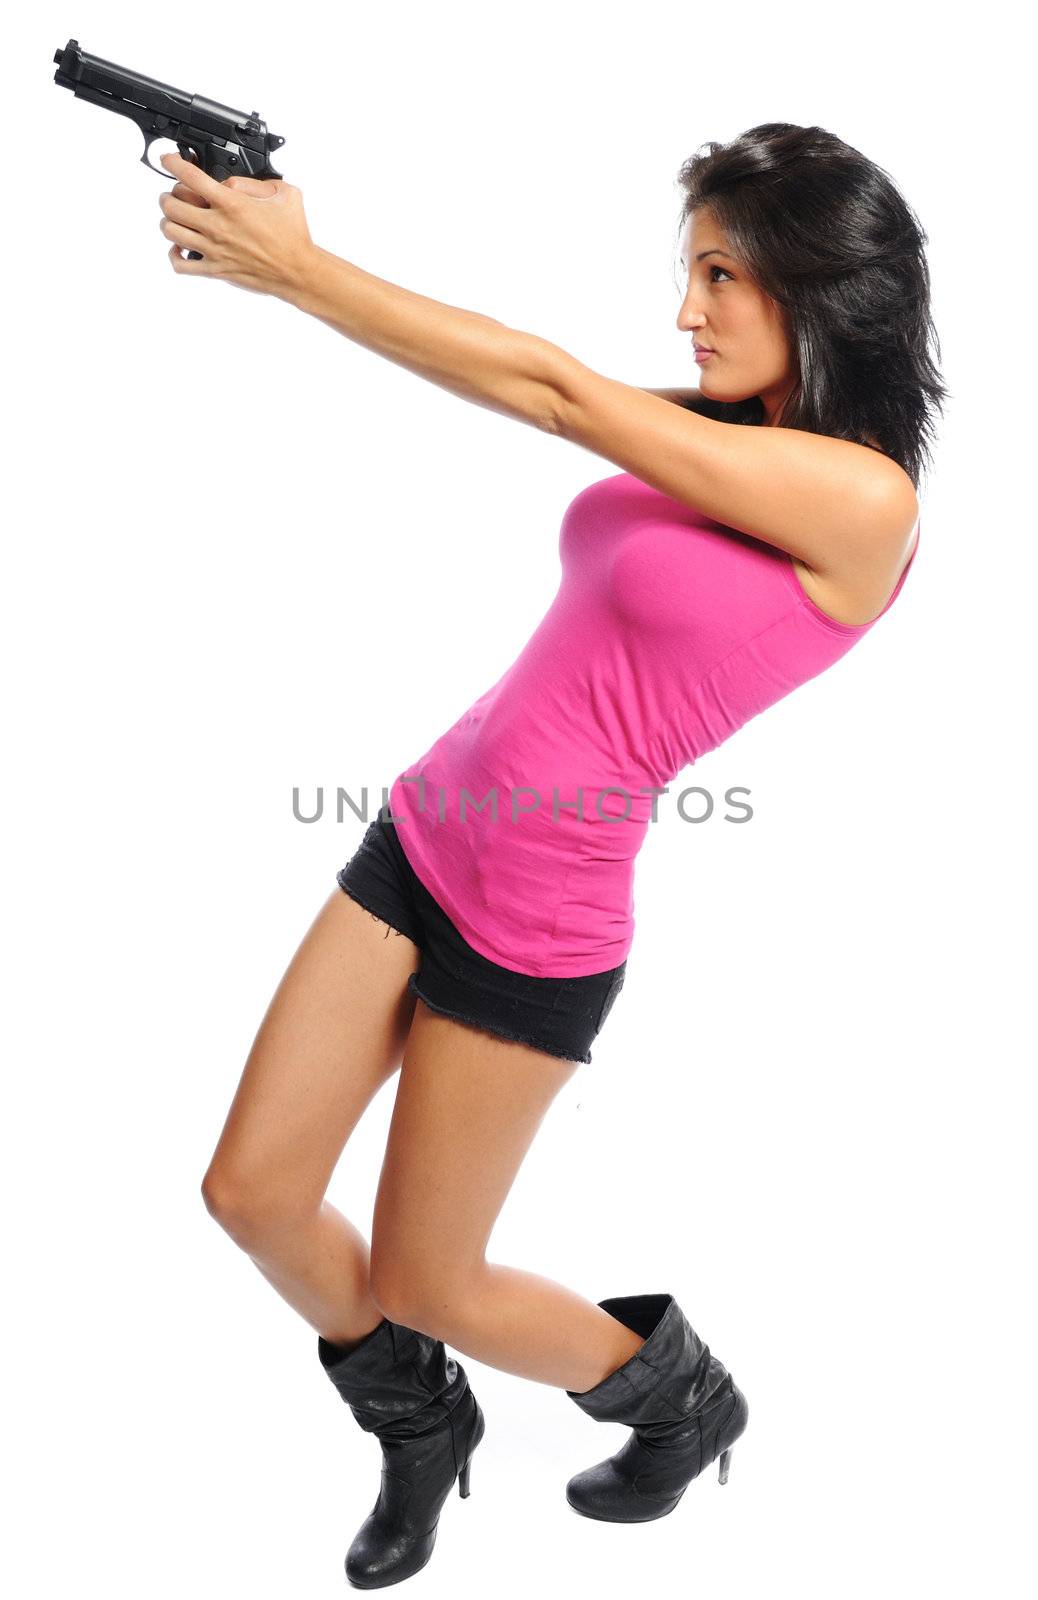 Attractive young hispanic woman with a gun on a white background